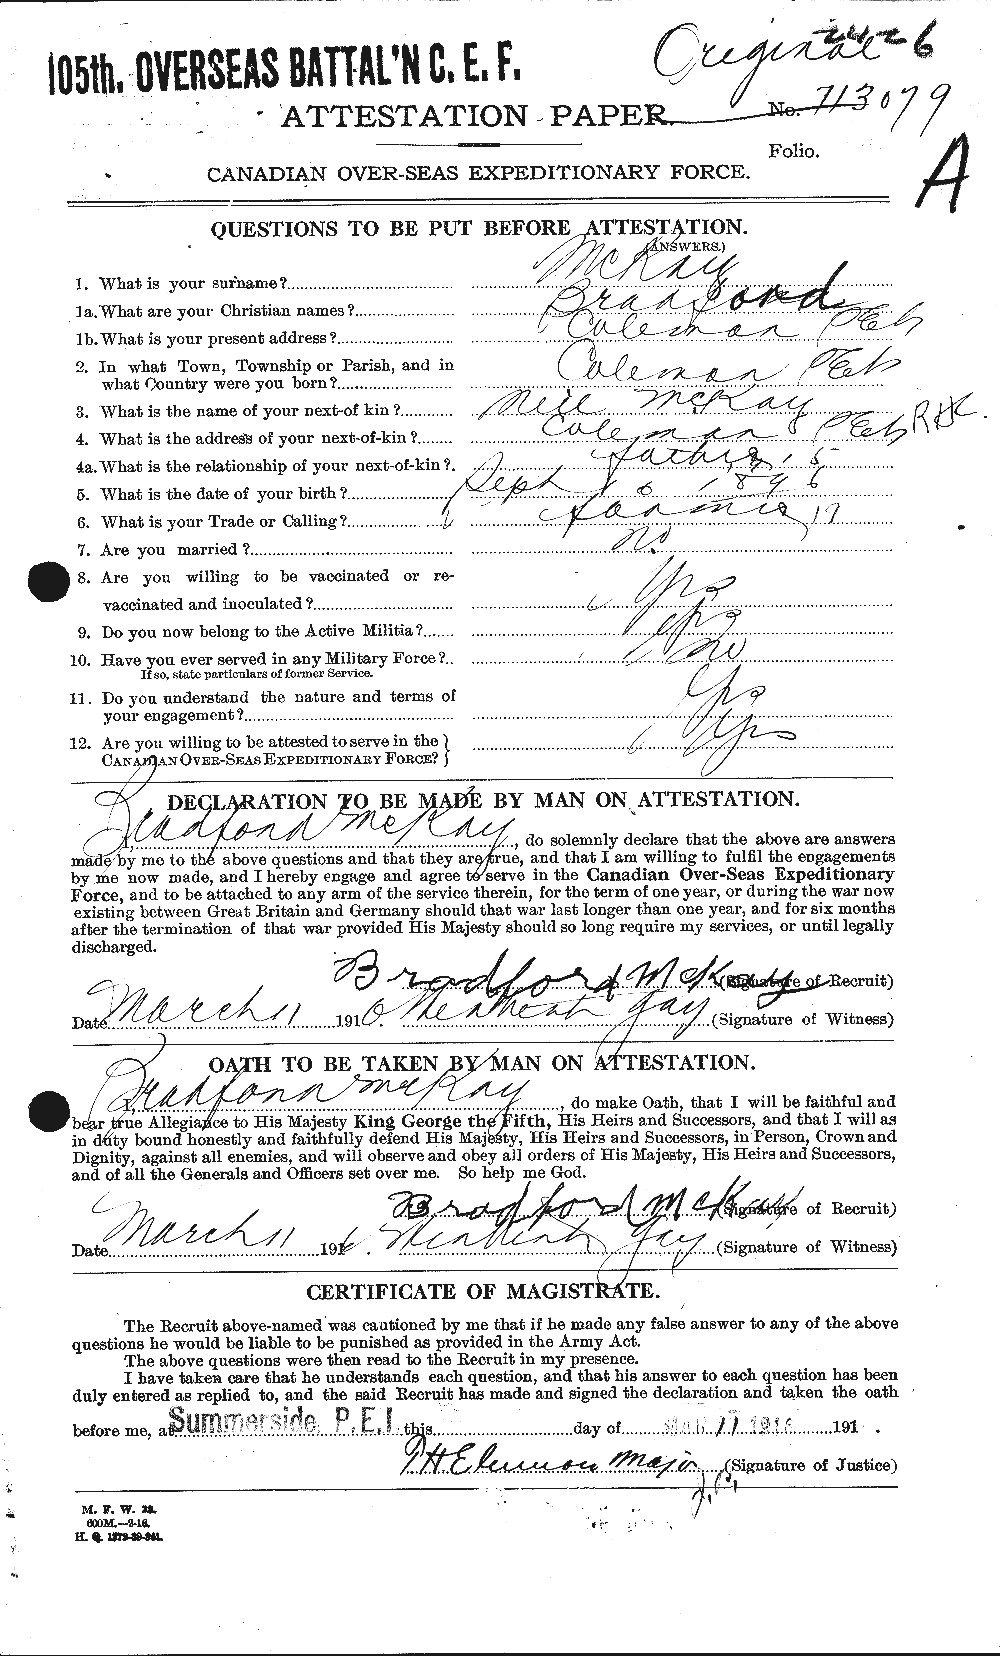 Personnel Records of the First World War - CEF 531044a